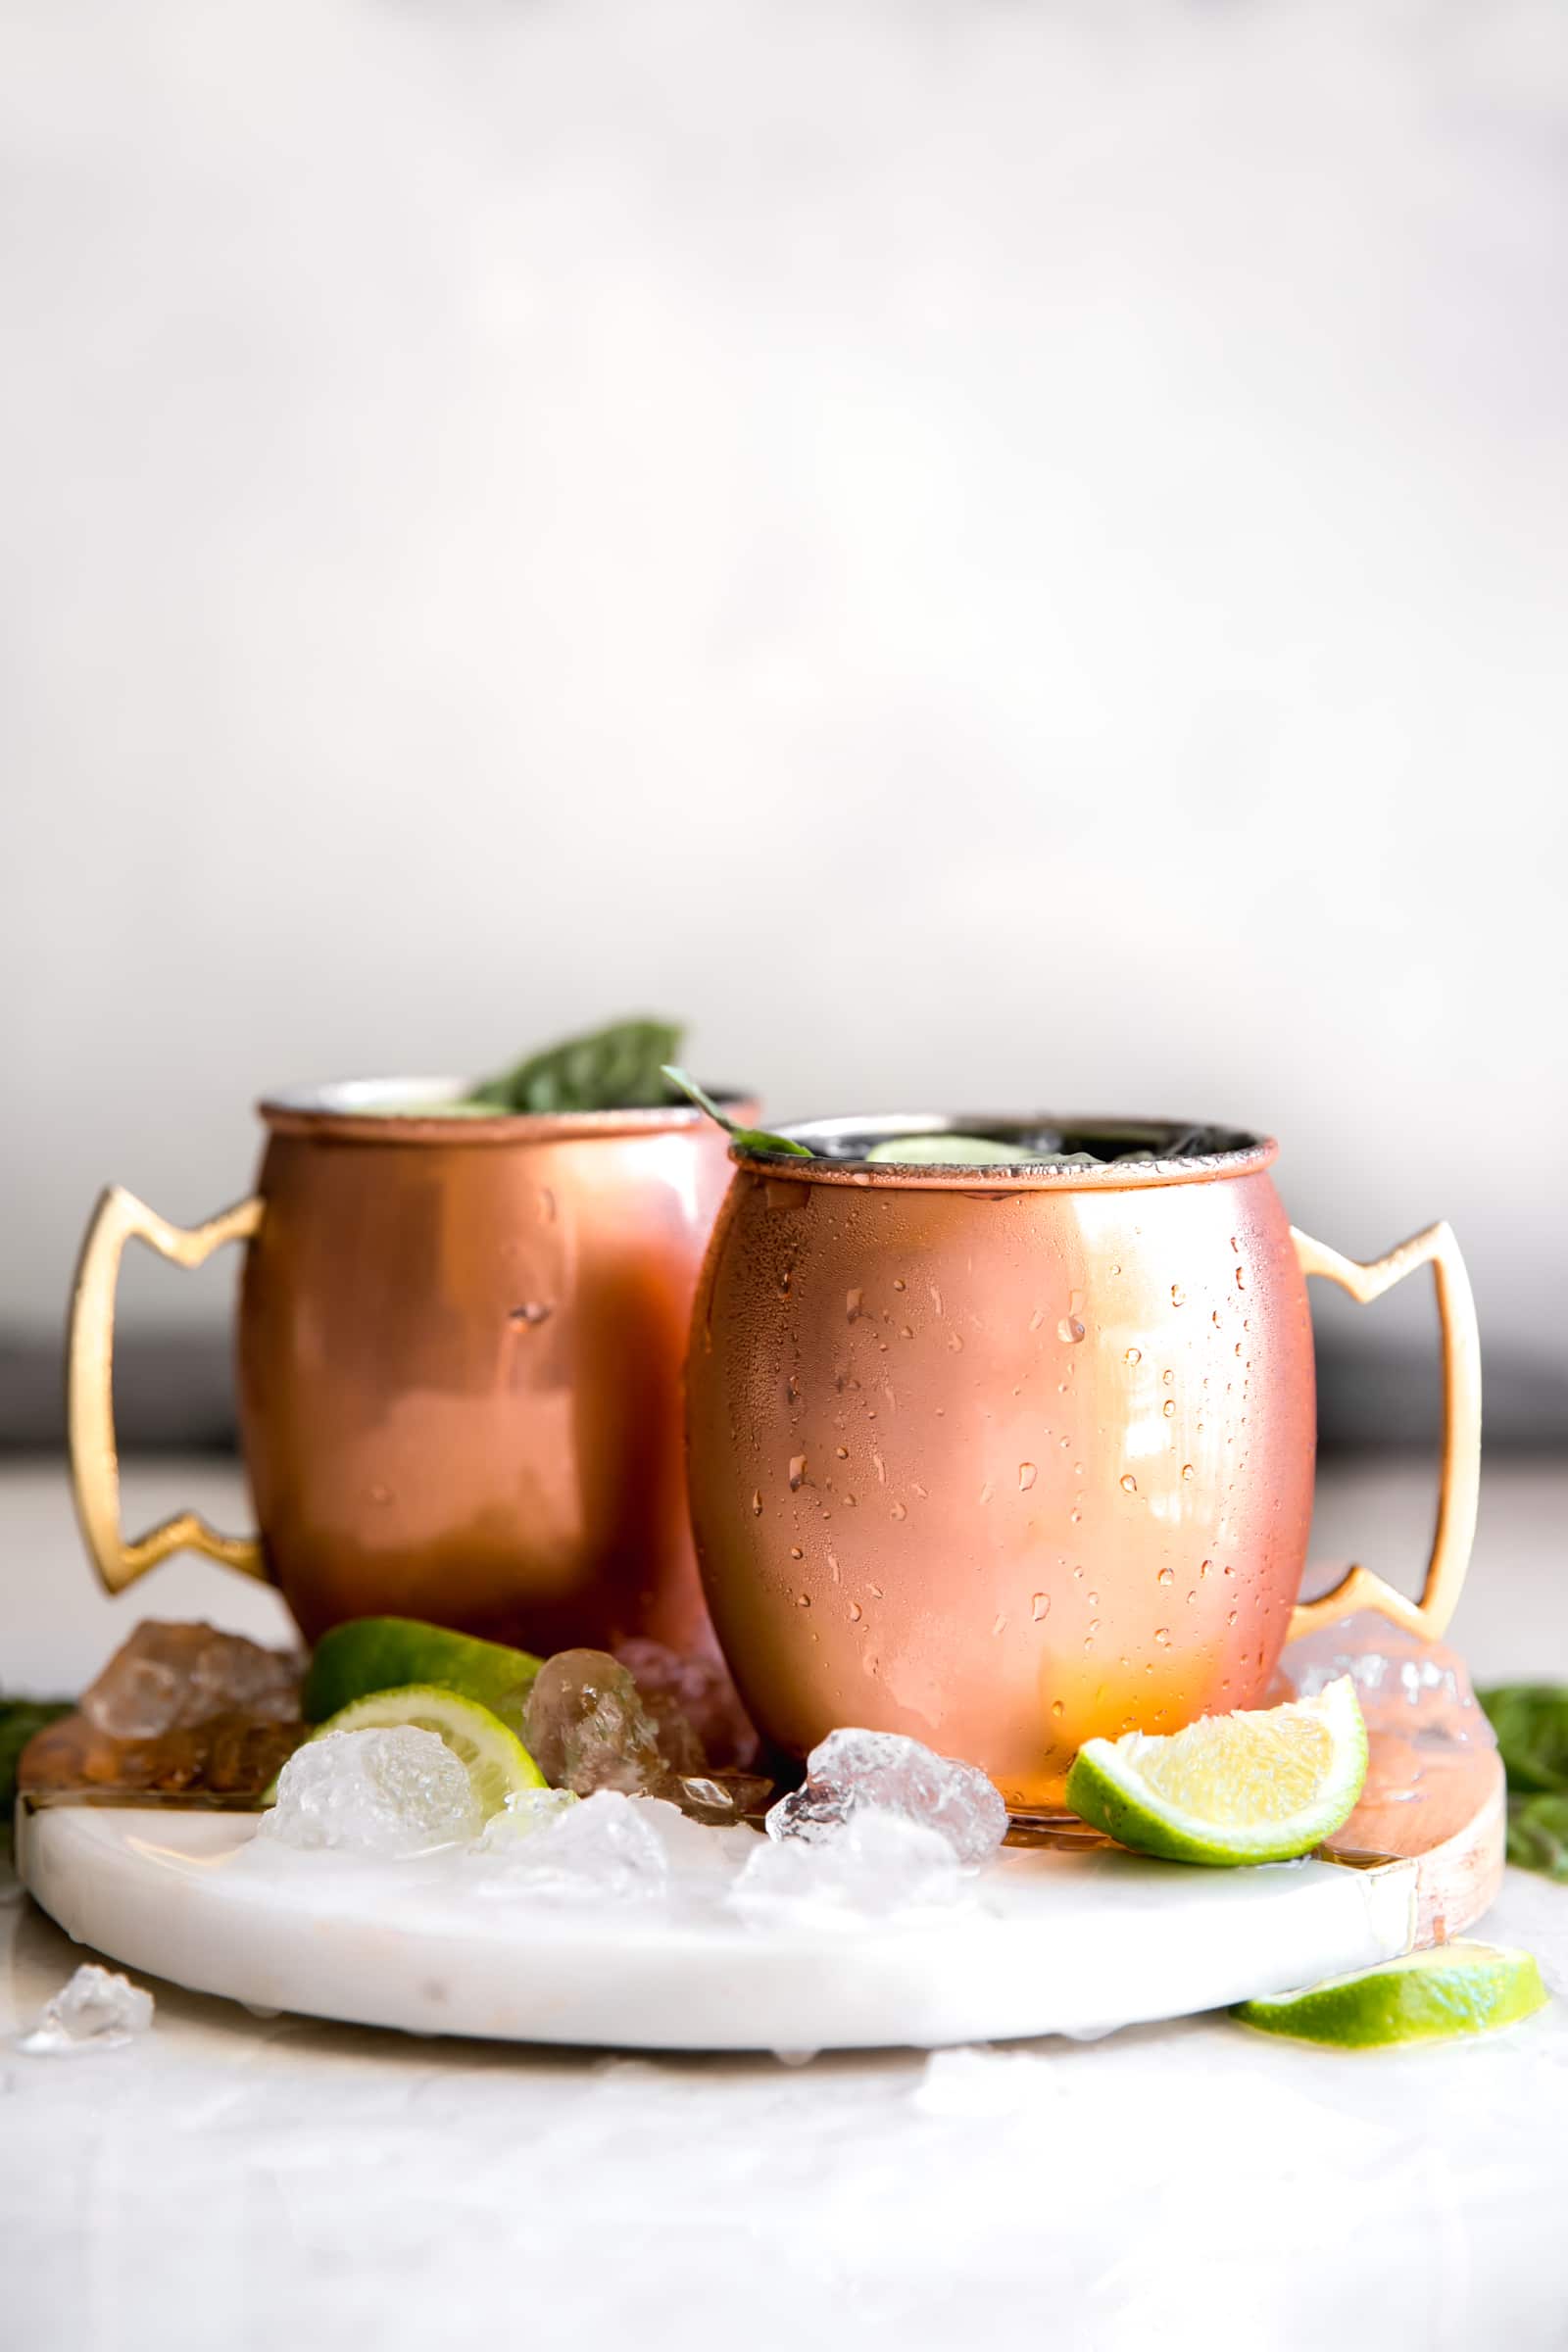 Guava Basil Moscow Mule. A twist to the traditional refreshing Vodka cocktail made with spicy ginger beer, guava nectar, fresh lime and sweet basil. Delicious drink for any time of year!